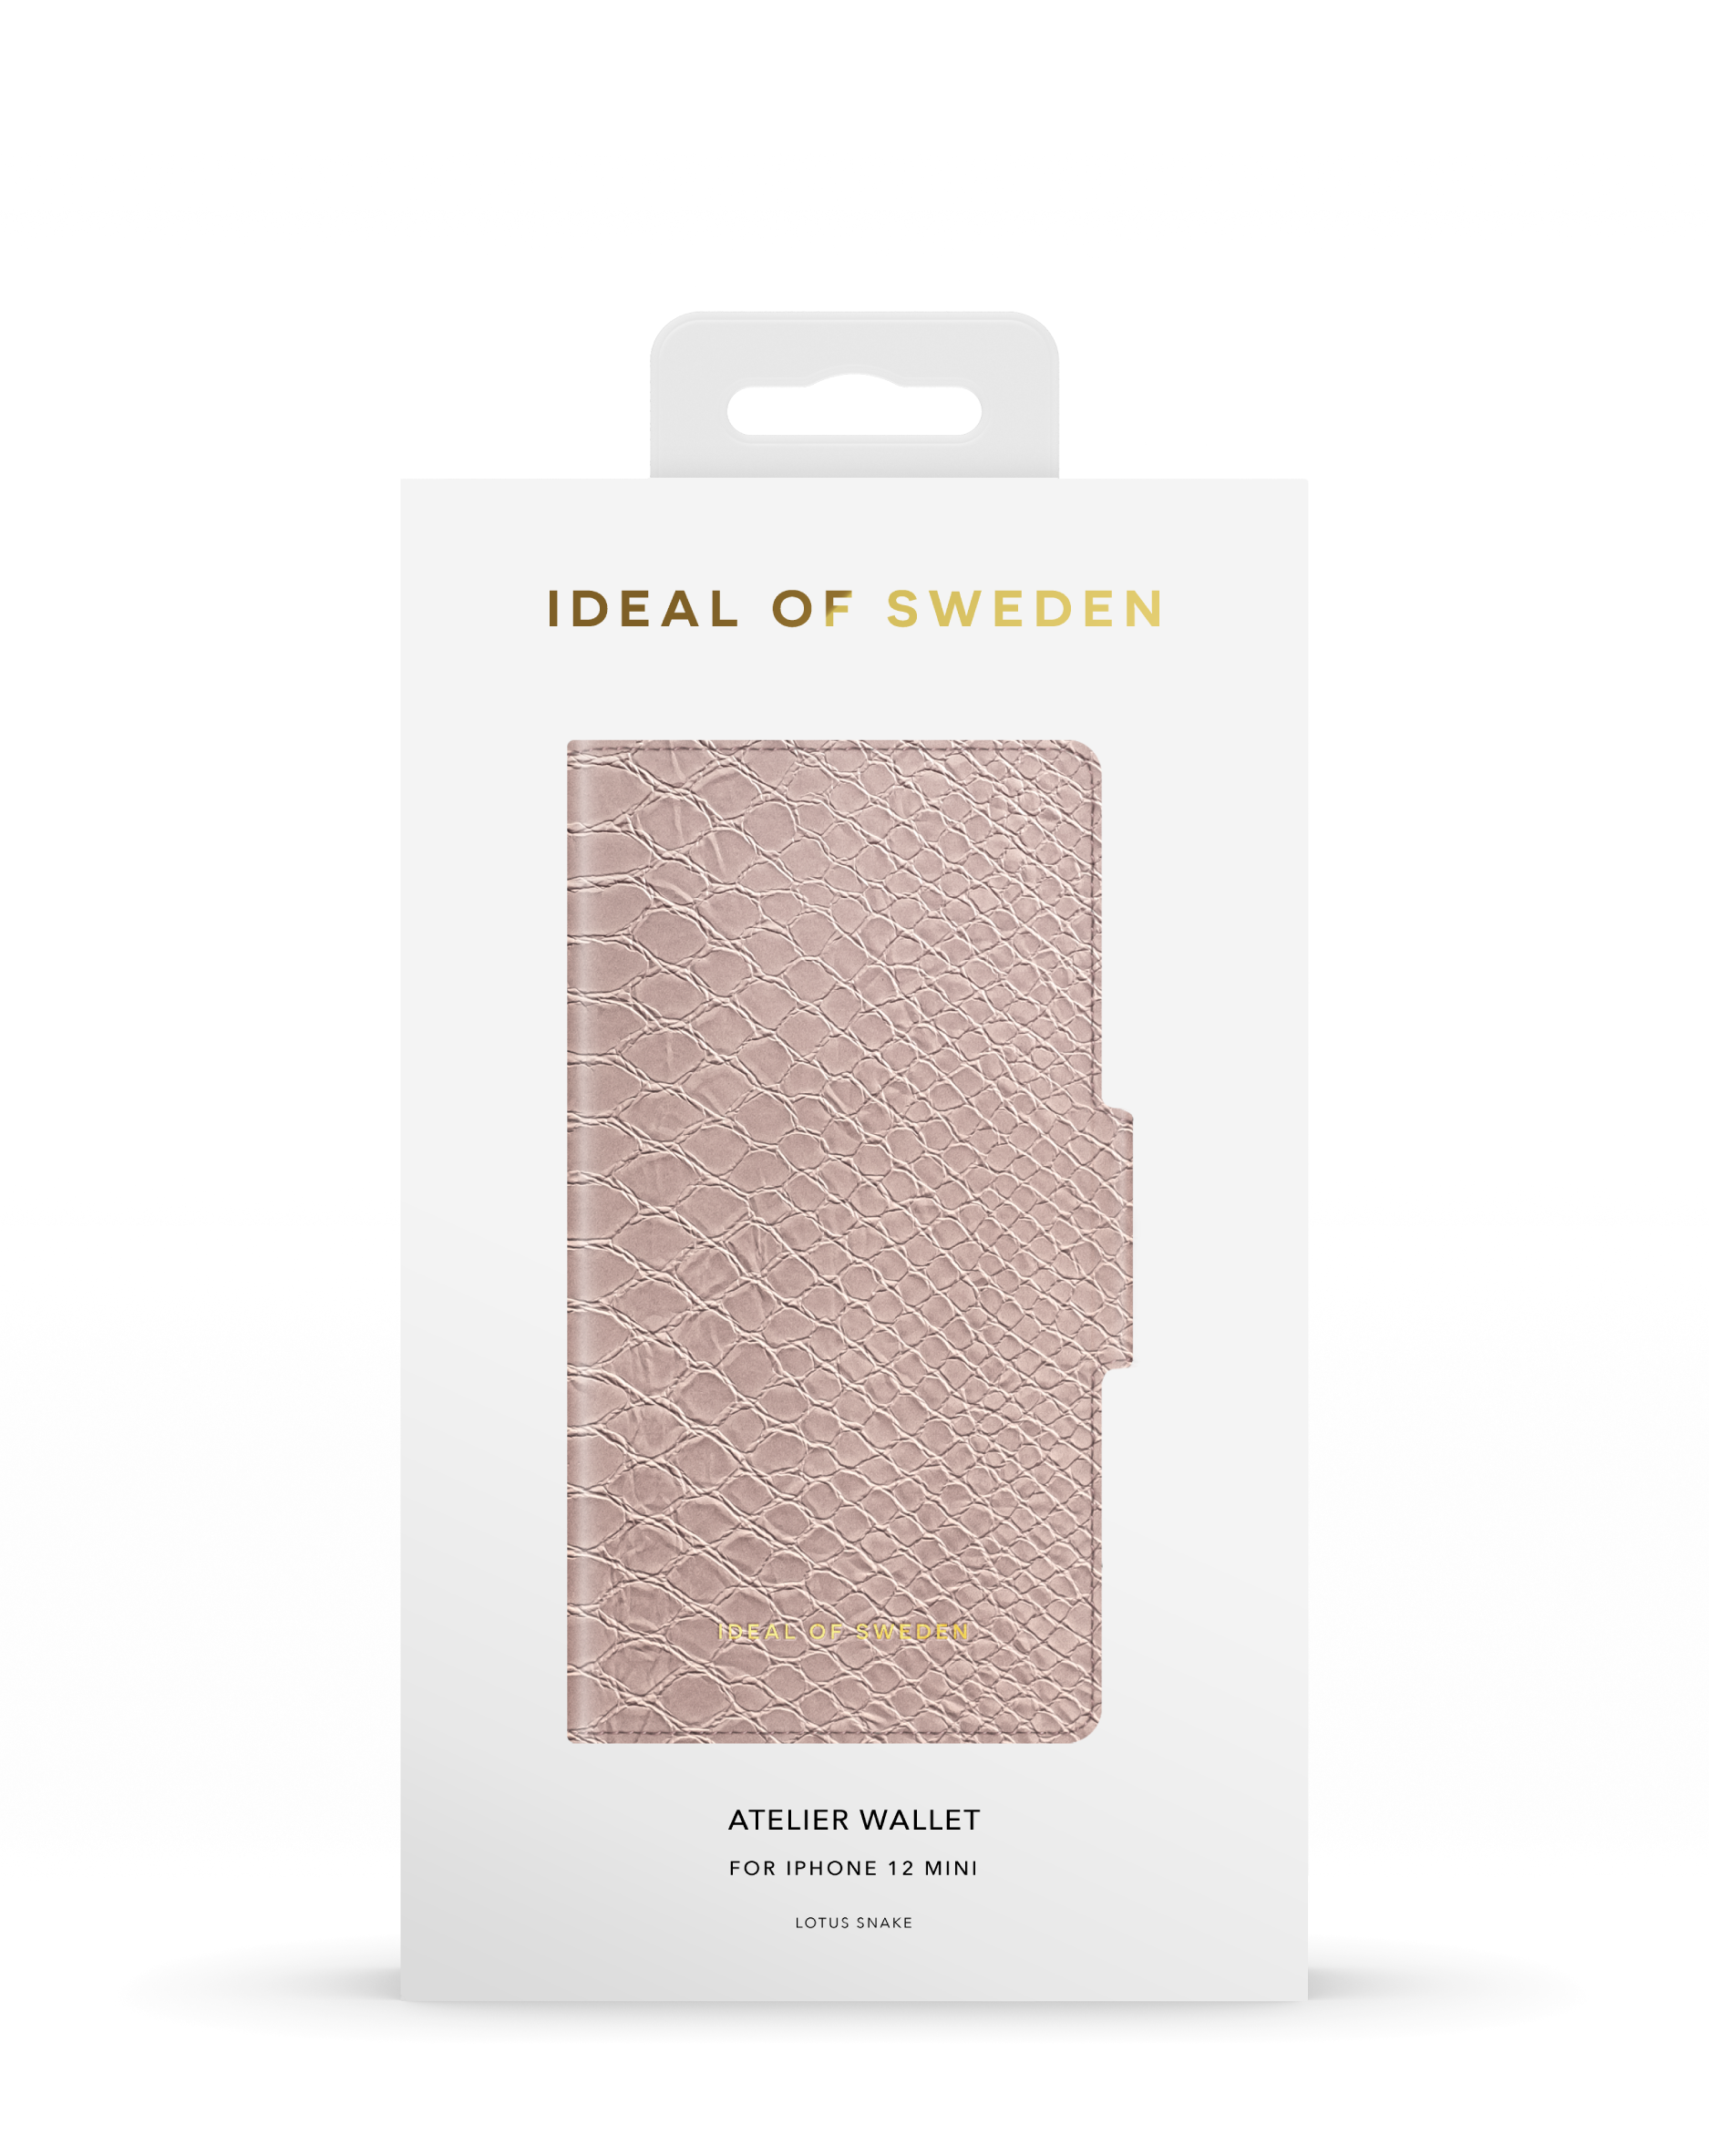 OF 12 Apple, Snake mini, IDEAL IPhone SWEDEN Bookcover, IDAW-I2054-234, Lotus